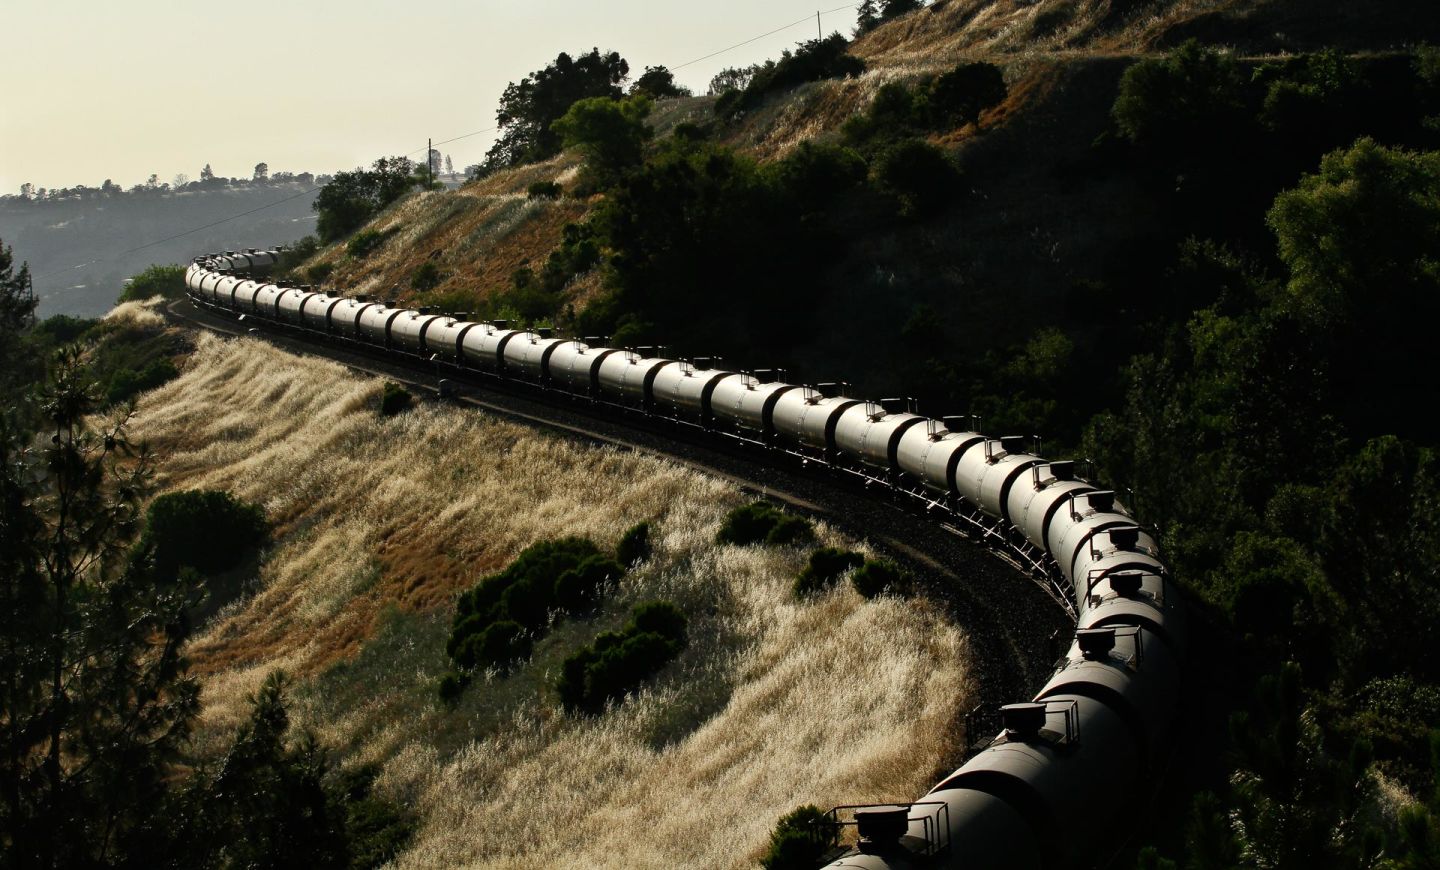 A train carrying crude oil operated by BNSF railway in California. Jake Miille/Jake Miille Photography